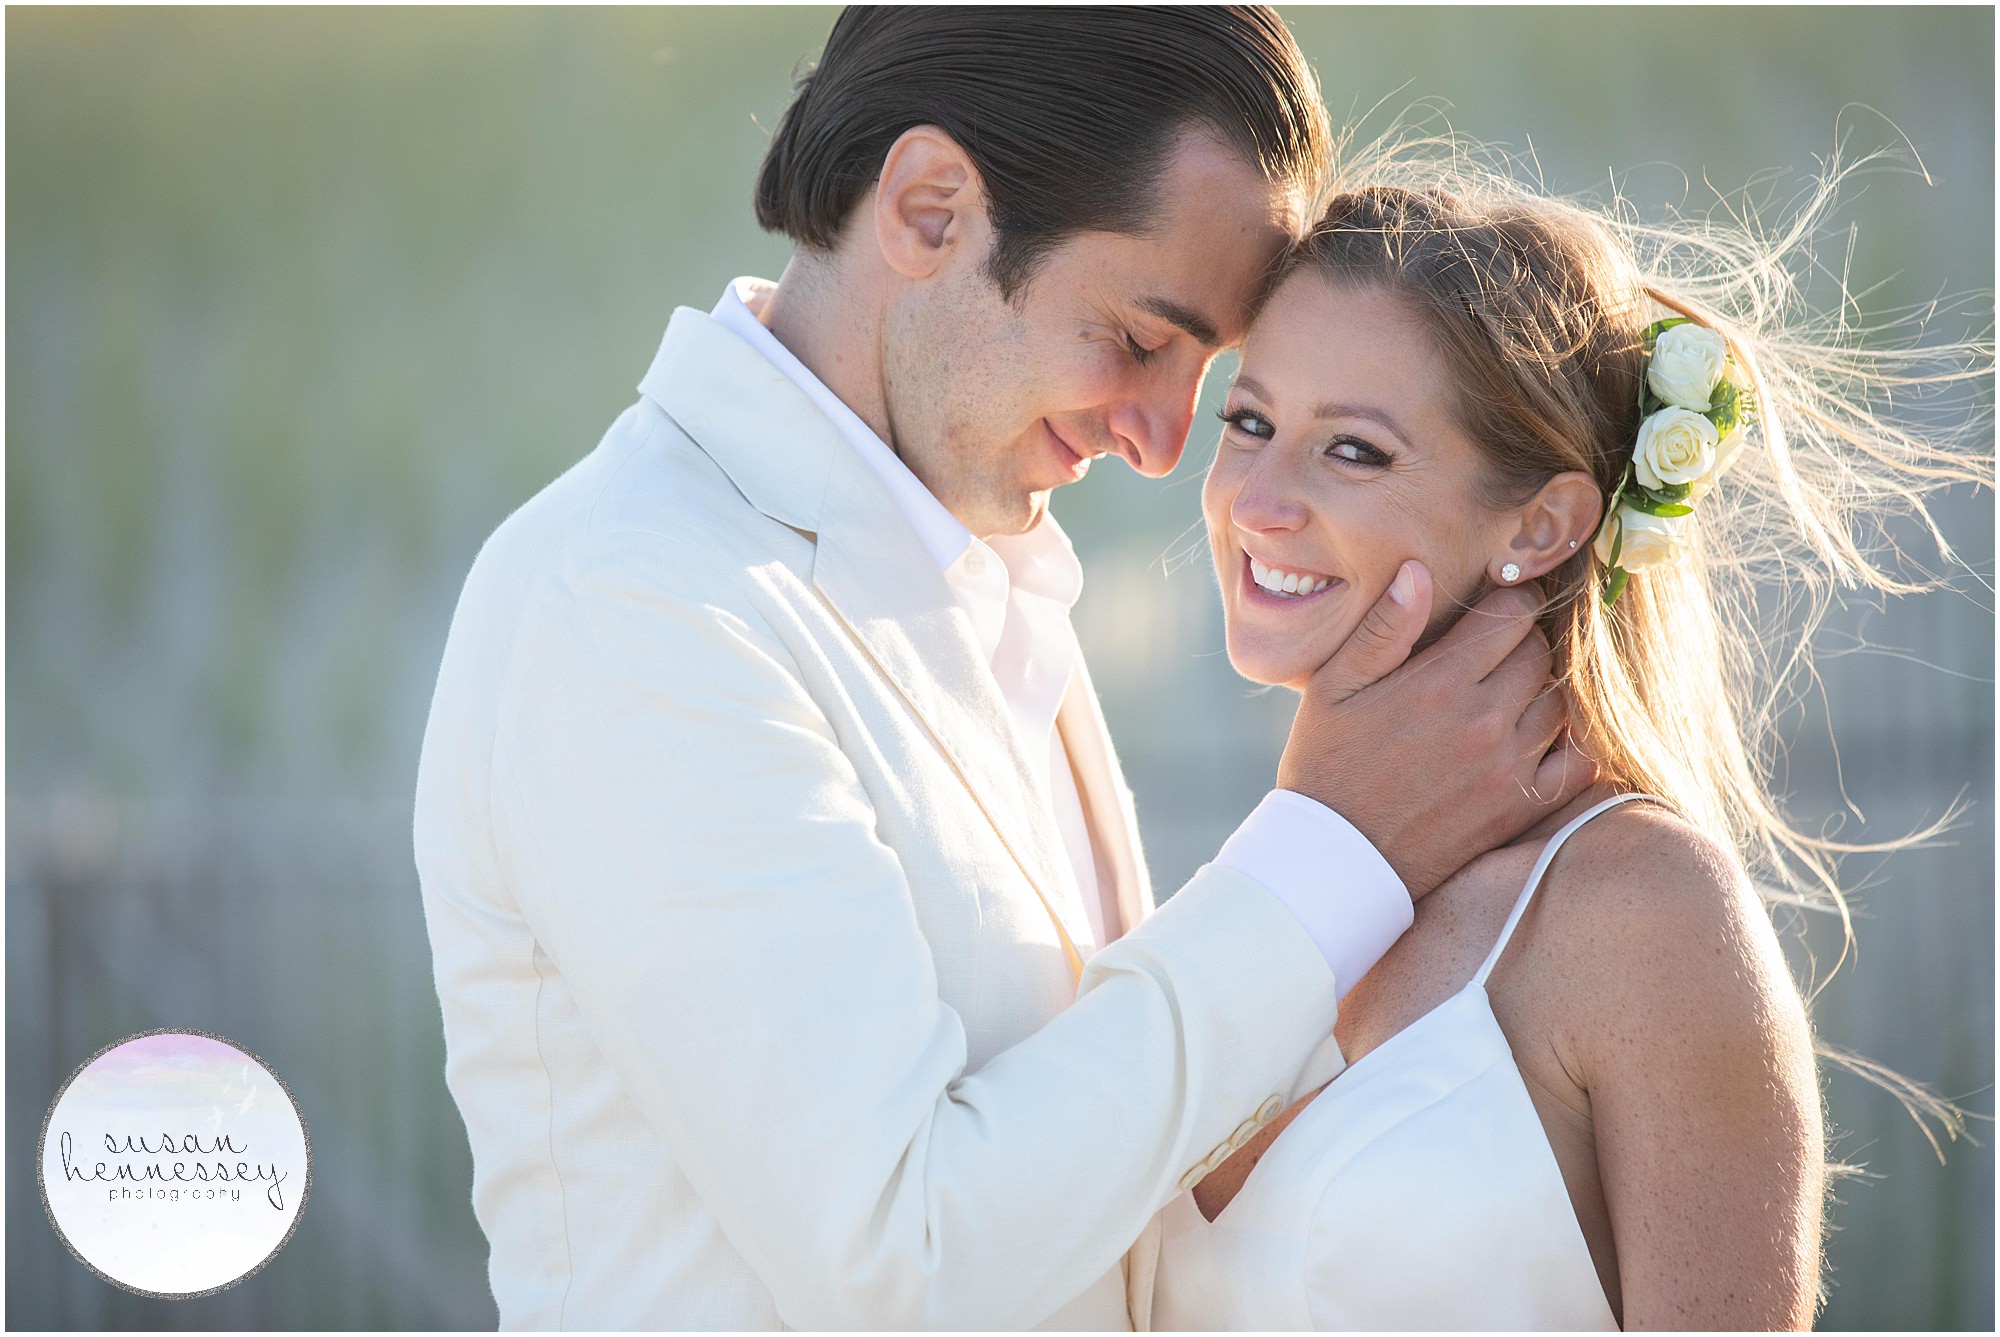 Romantic portraits at South Jersey microwedding